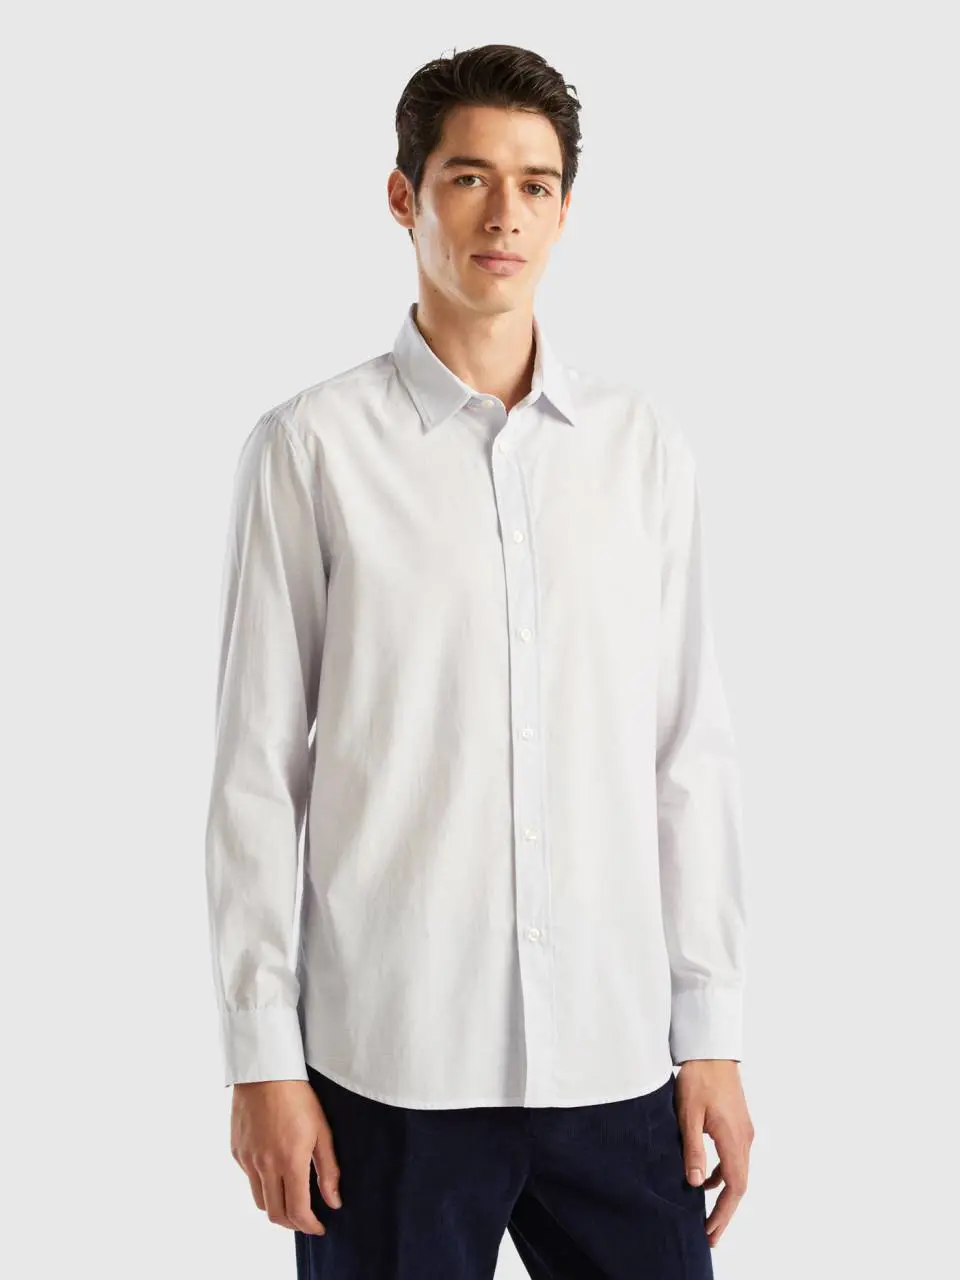 Benetton regular fit shirt with micro pattern. 1